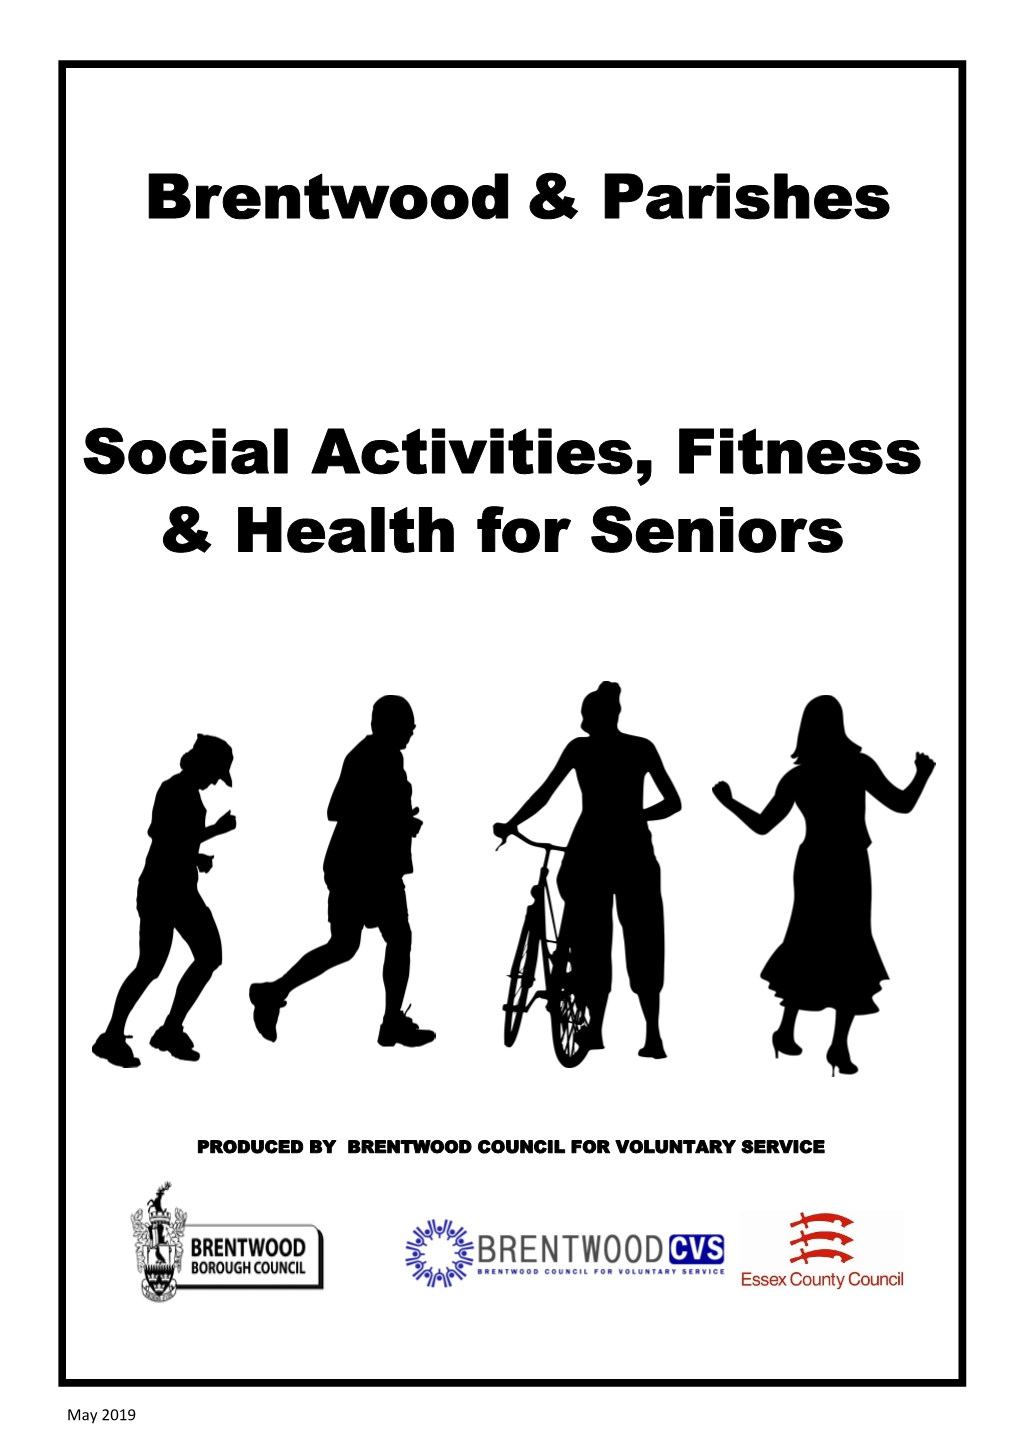 Social Activities, Fitness & Health for Seniors Brentwood & Parishes